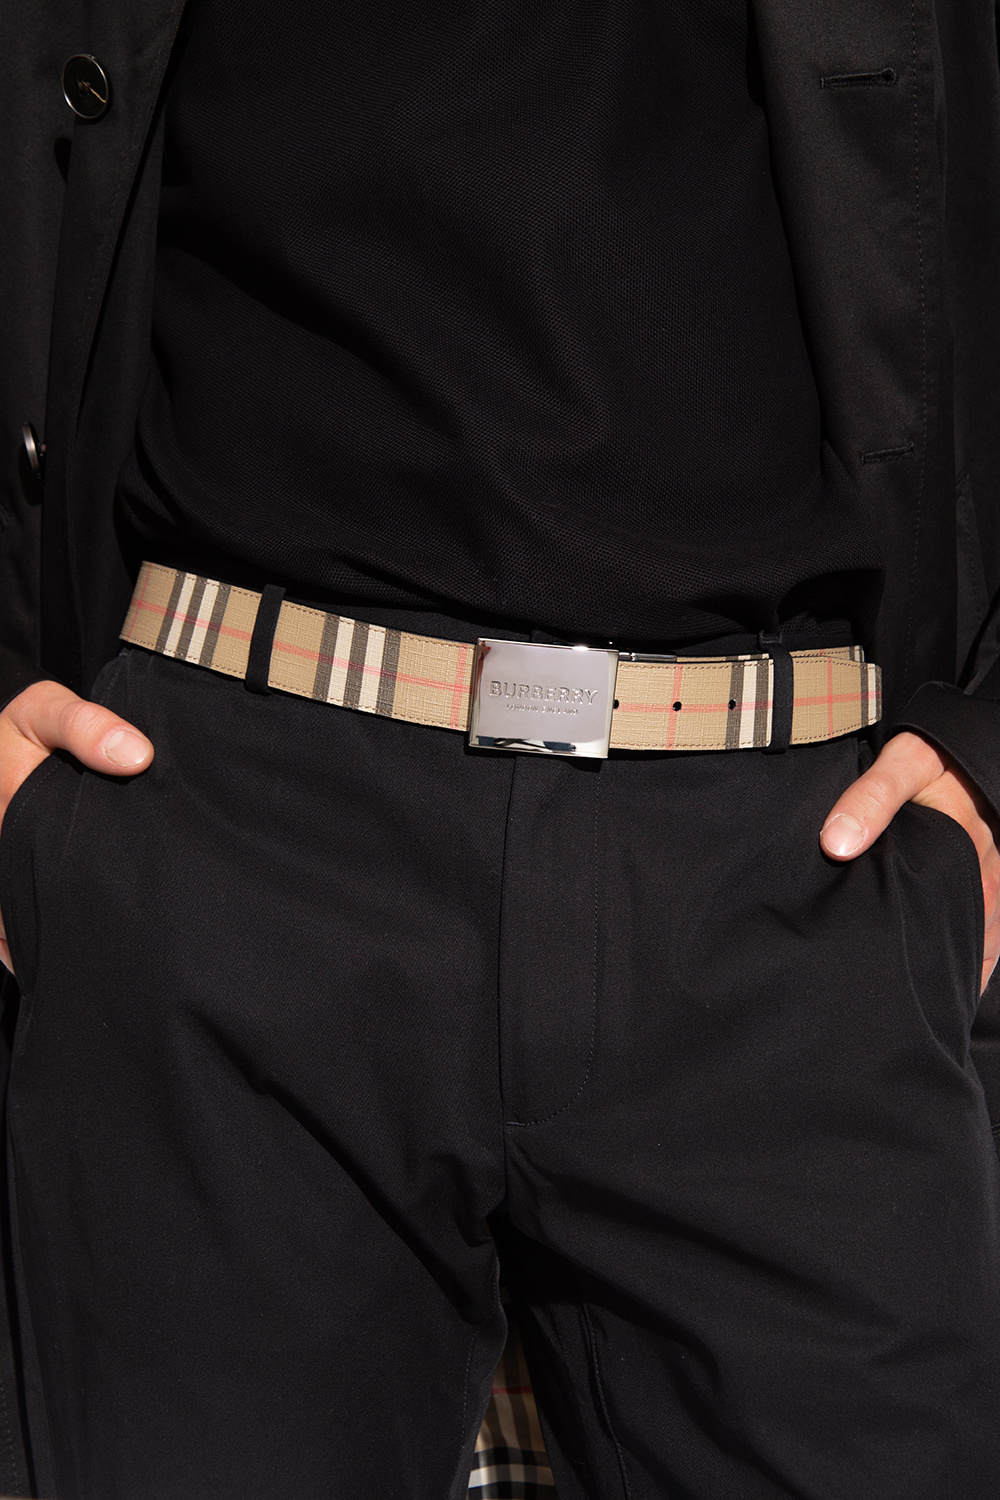 burberry belt outfit